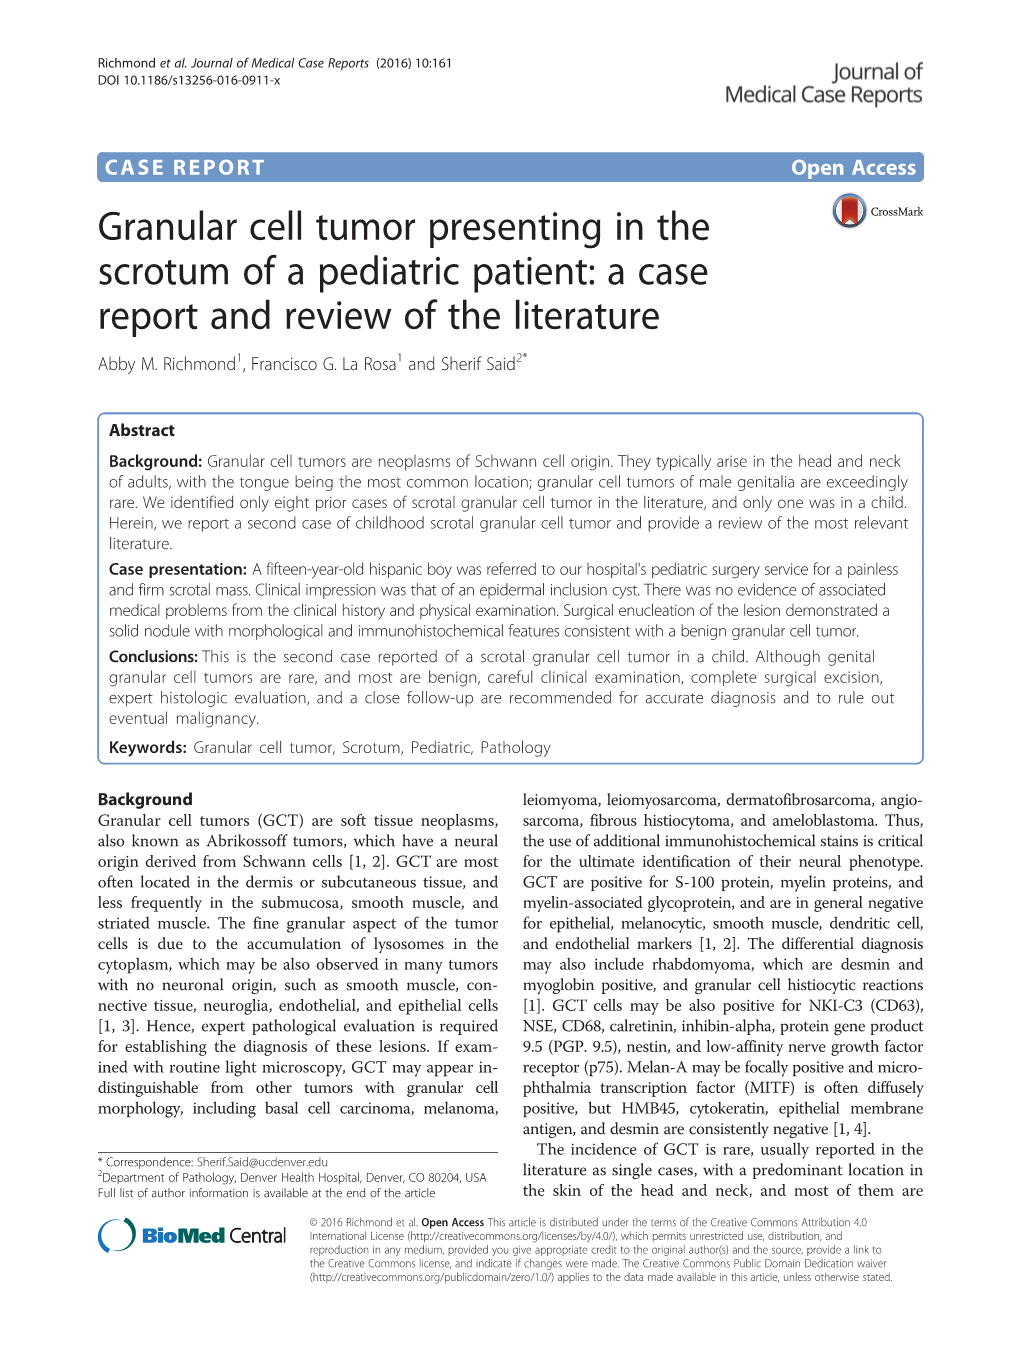 Granular Cell Tumor Presenting in the Scrotum of a Pediatric Patient: a Case Report and Review of the Literature Abby M